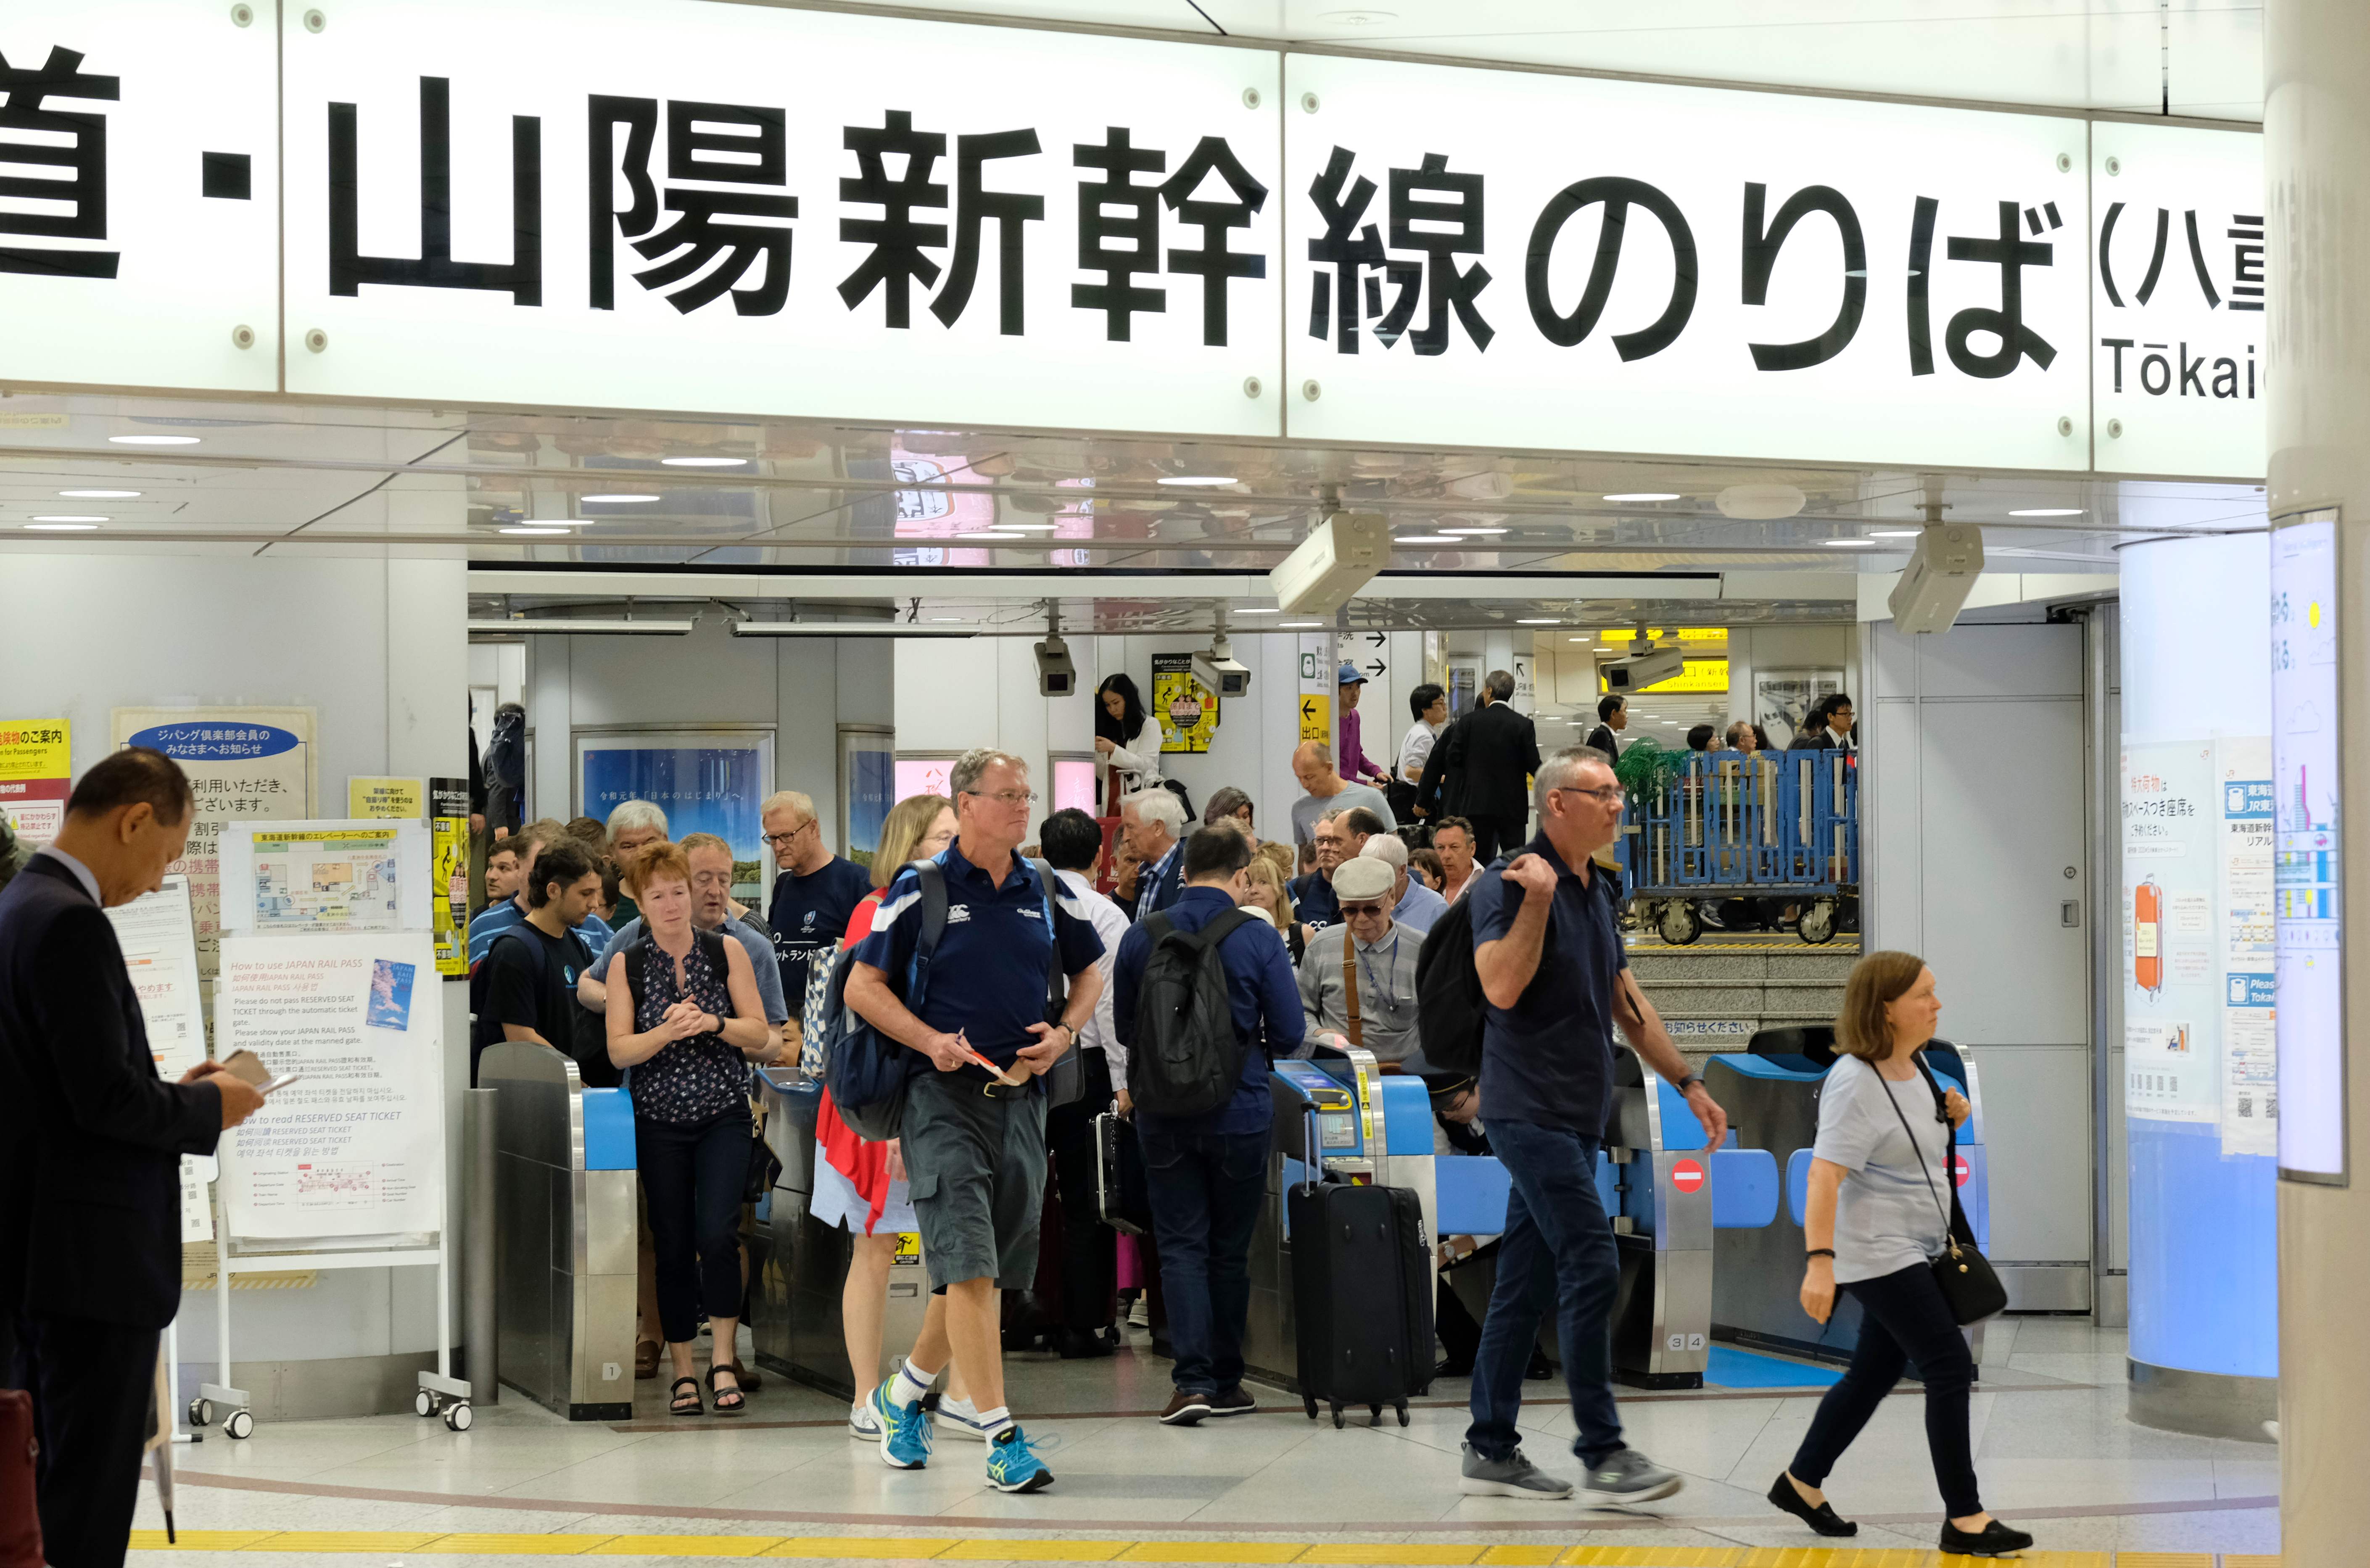 Foreign tourists arrive at JR Tokyo Station on Friday ahead of Typhoon Hagibis. | AFP-JIJI